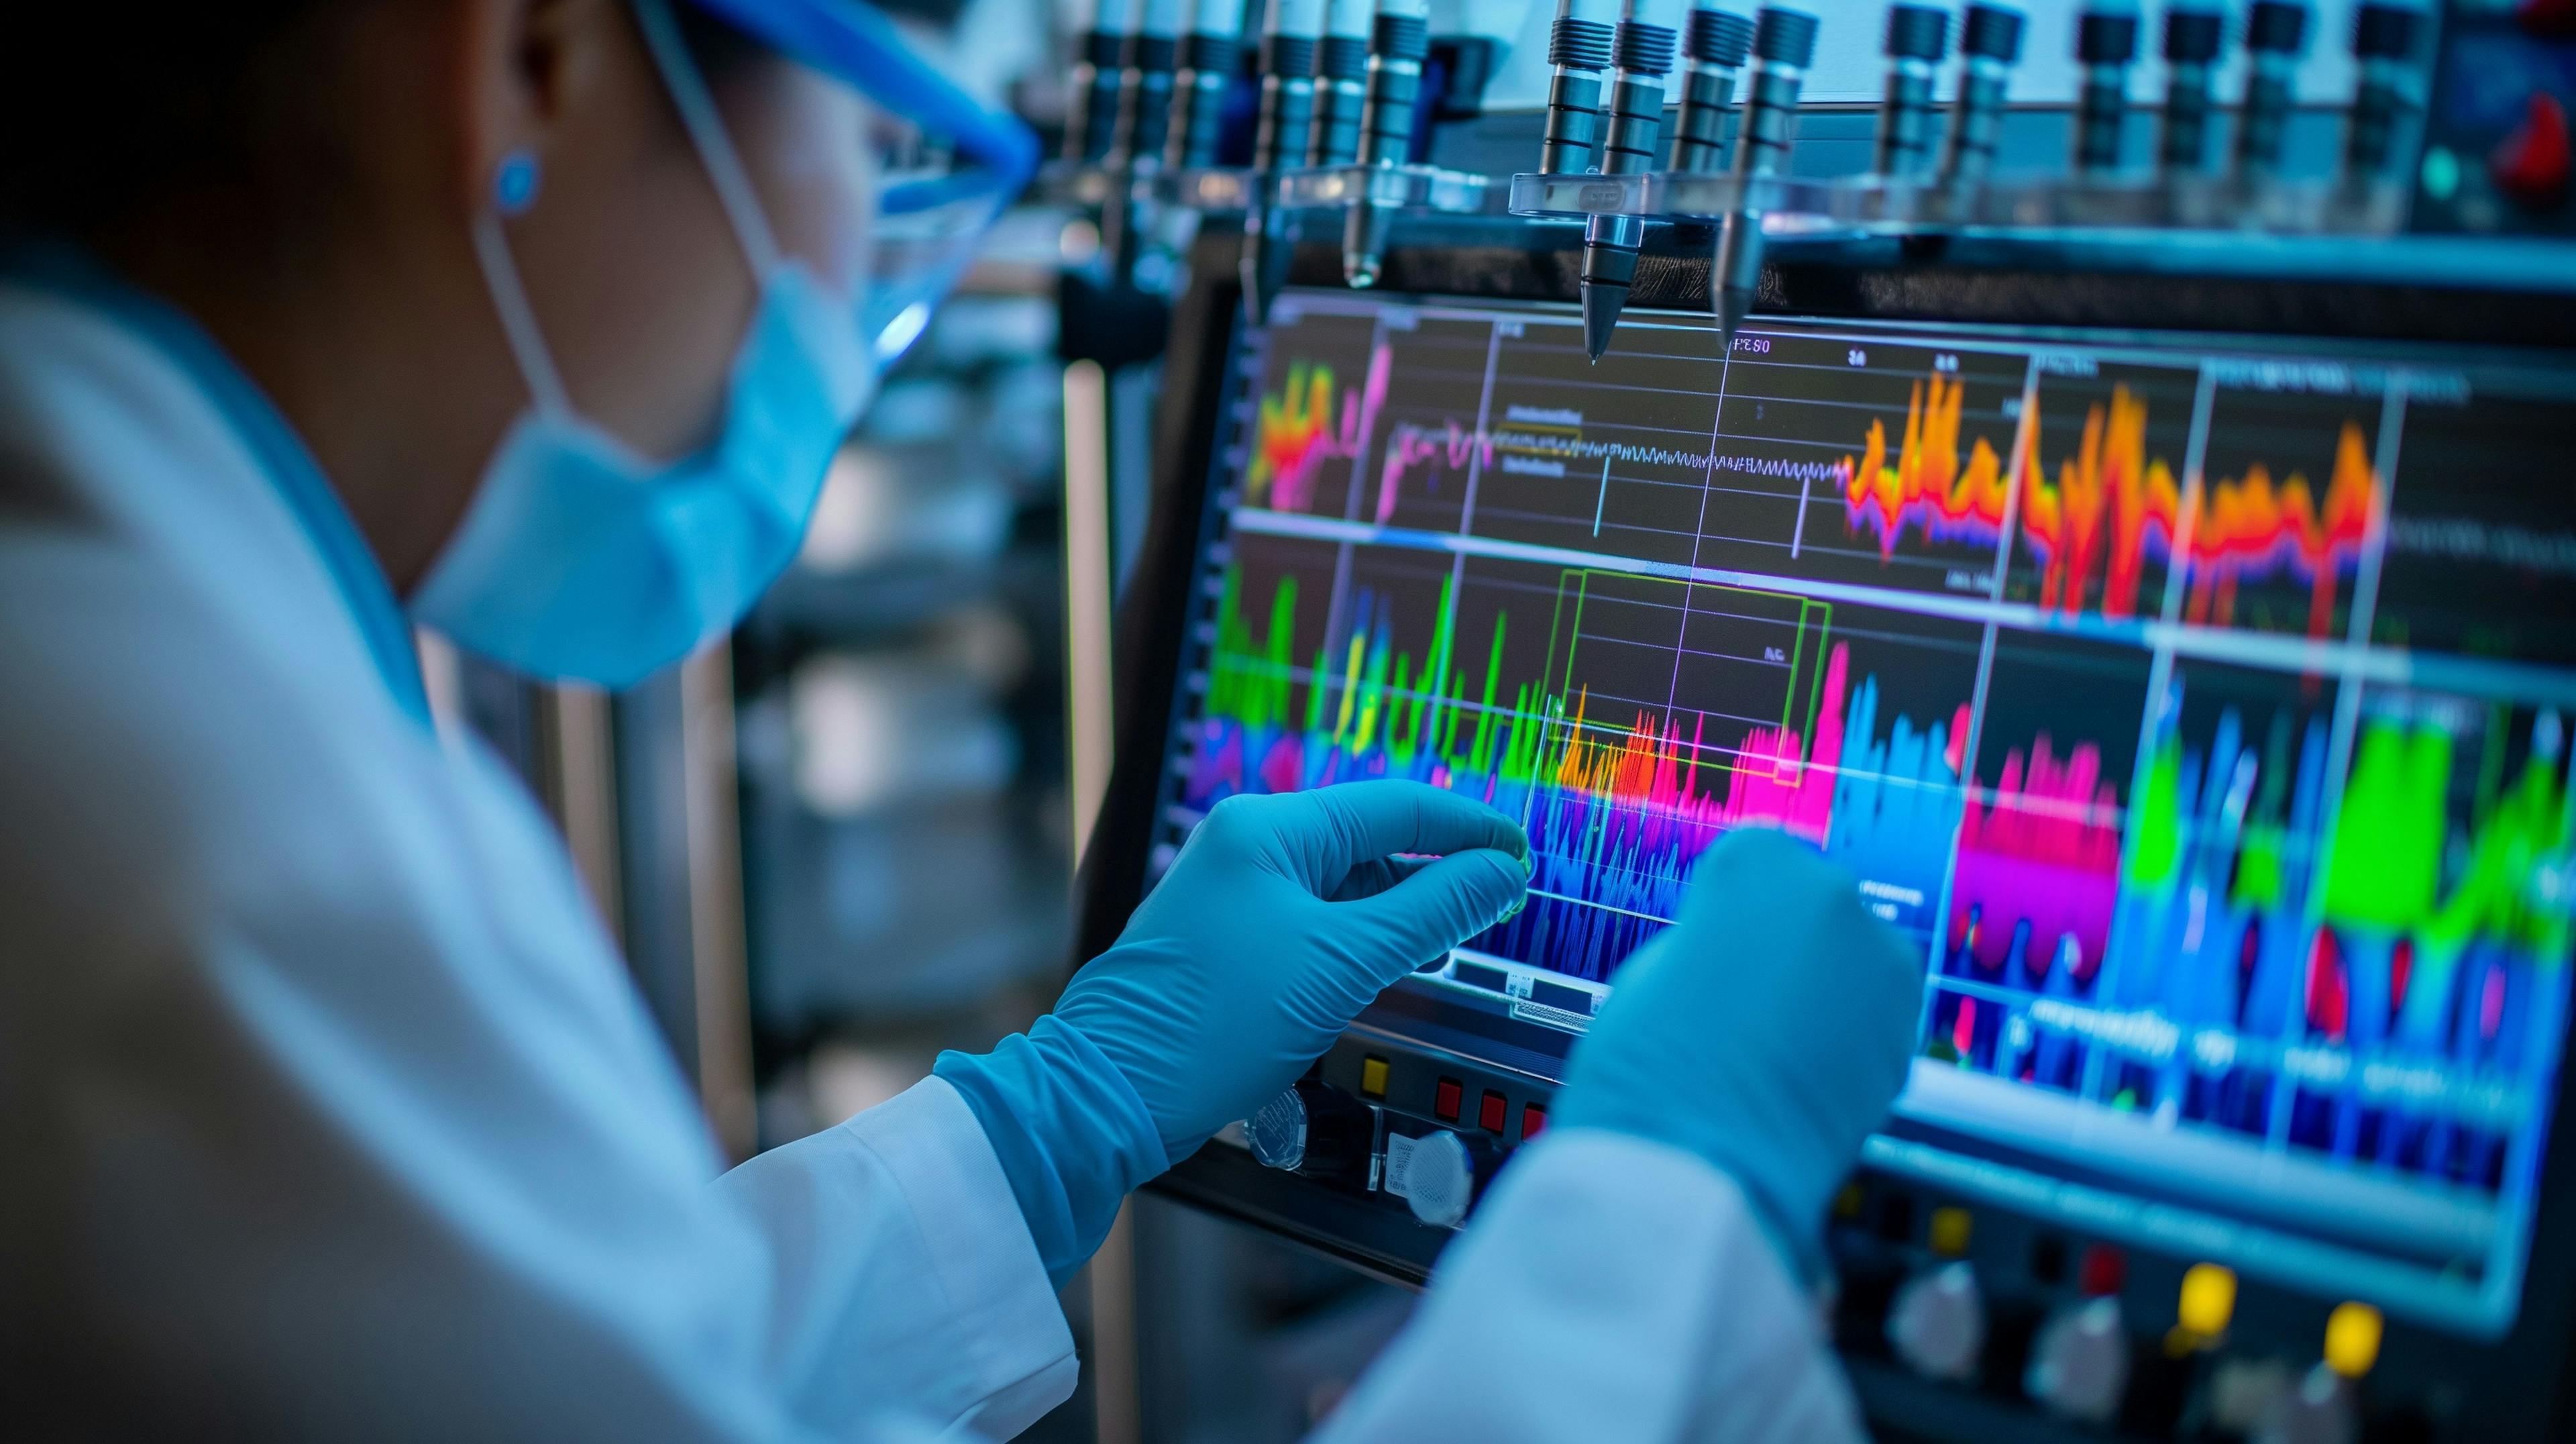 A scientist adjusts the settings of a high-performance liquid chromatography machine, where colorful peaks dance across the screen, representing the chemical makeup of a sample. | Image Credit: © Maksym - stock.adobe.com